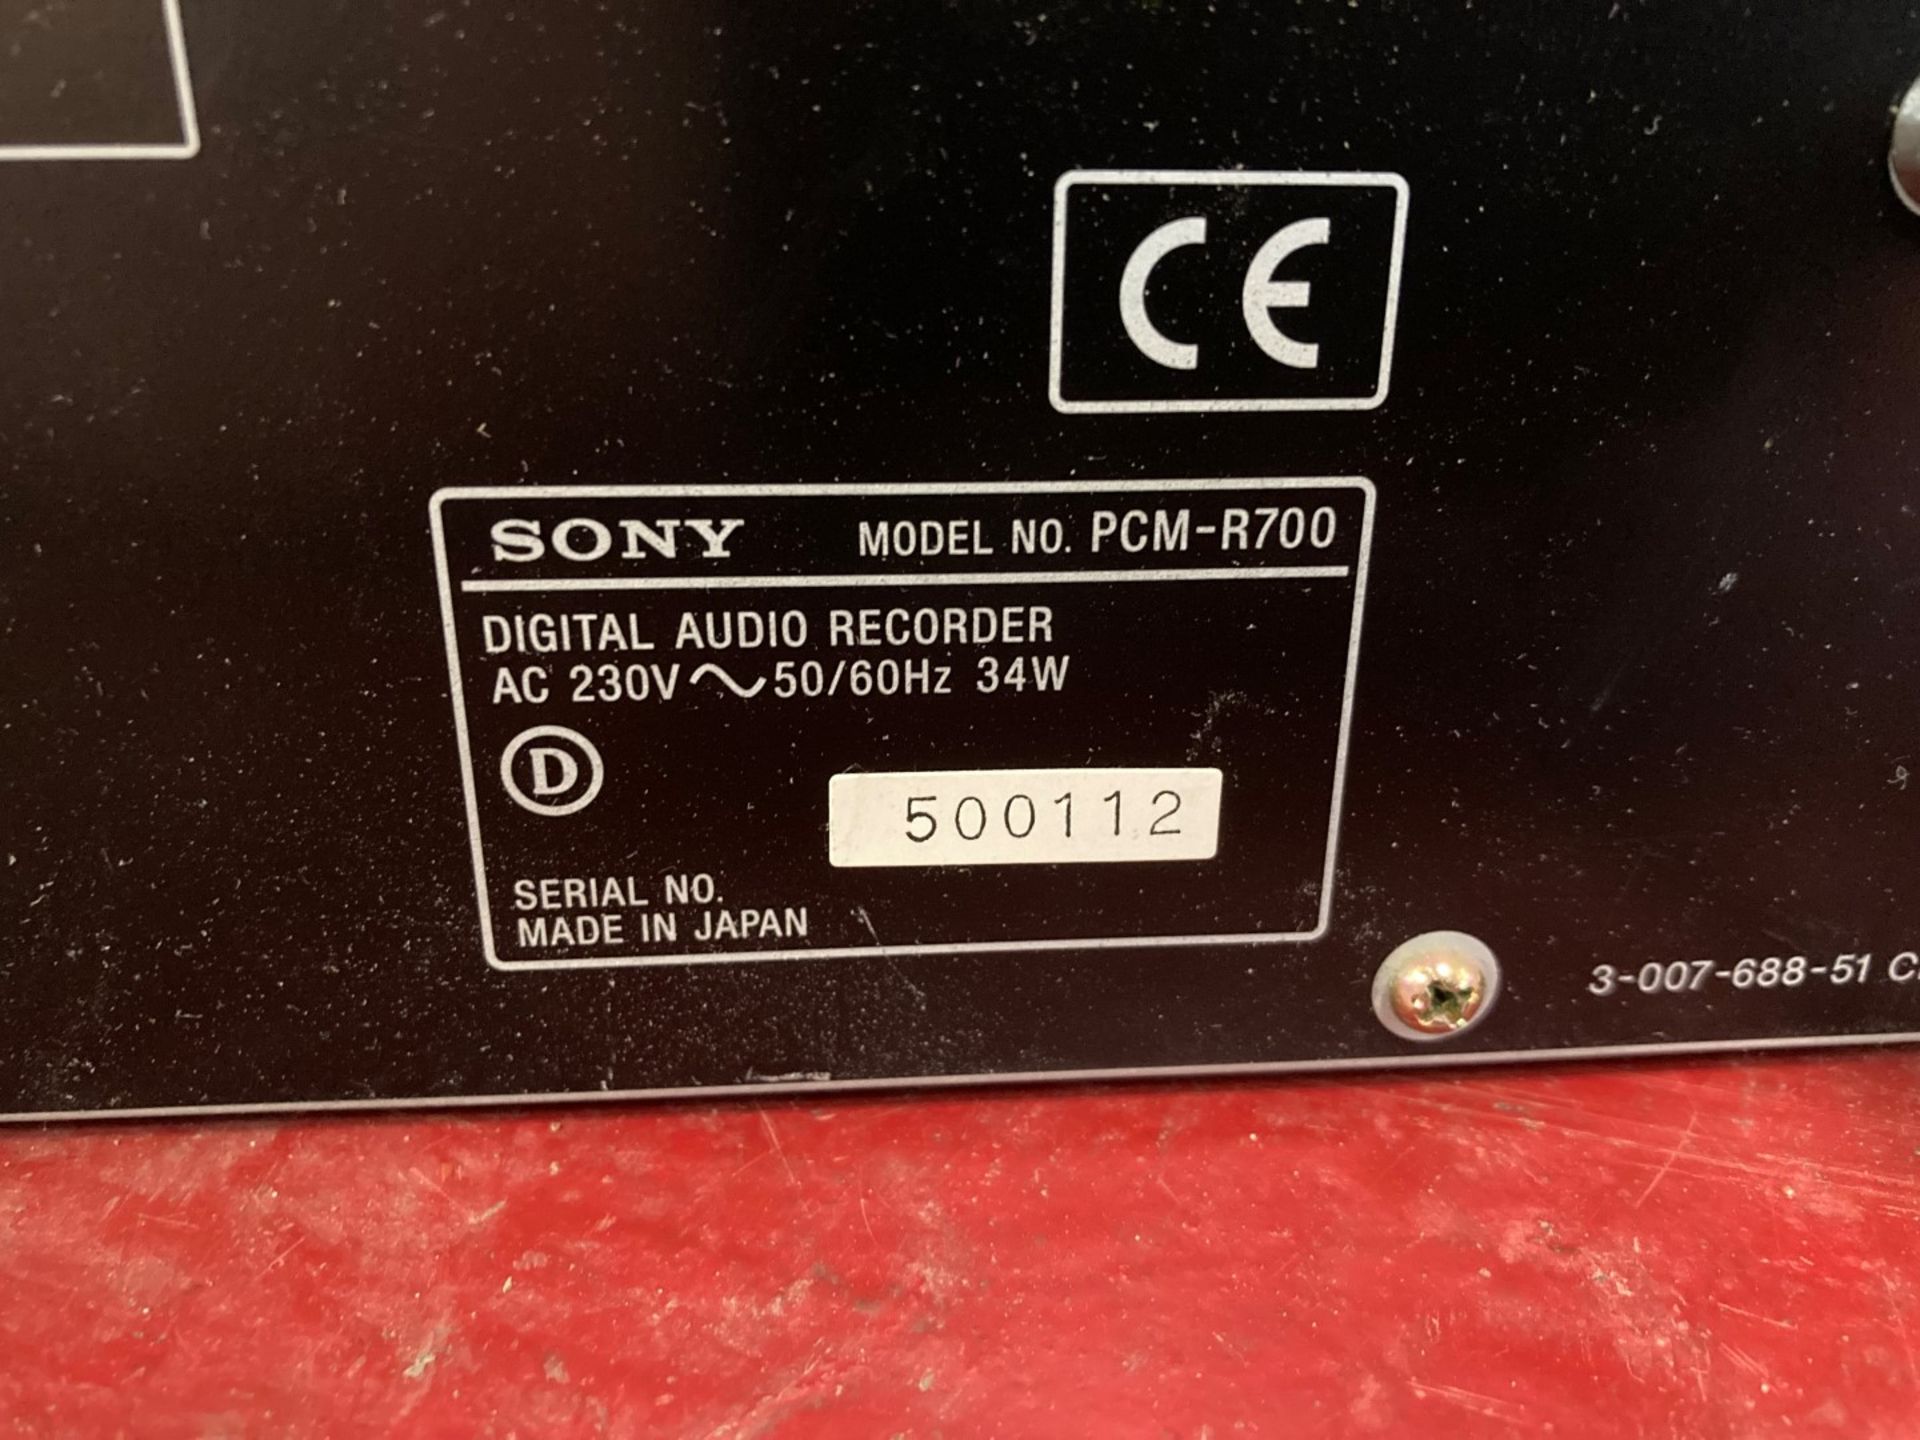 Sony PCM-R700 professional DAT recorder - Image 5 of 5